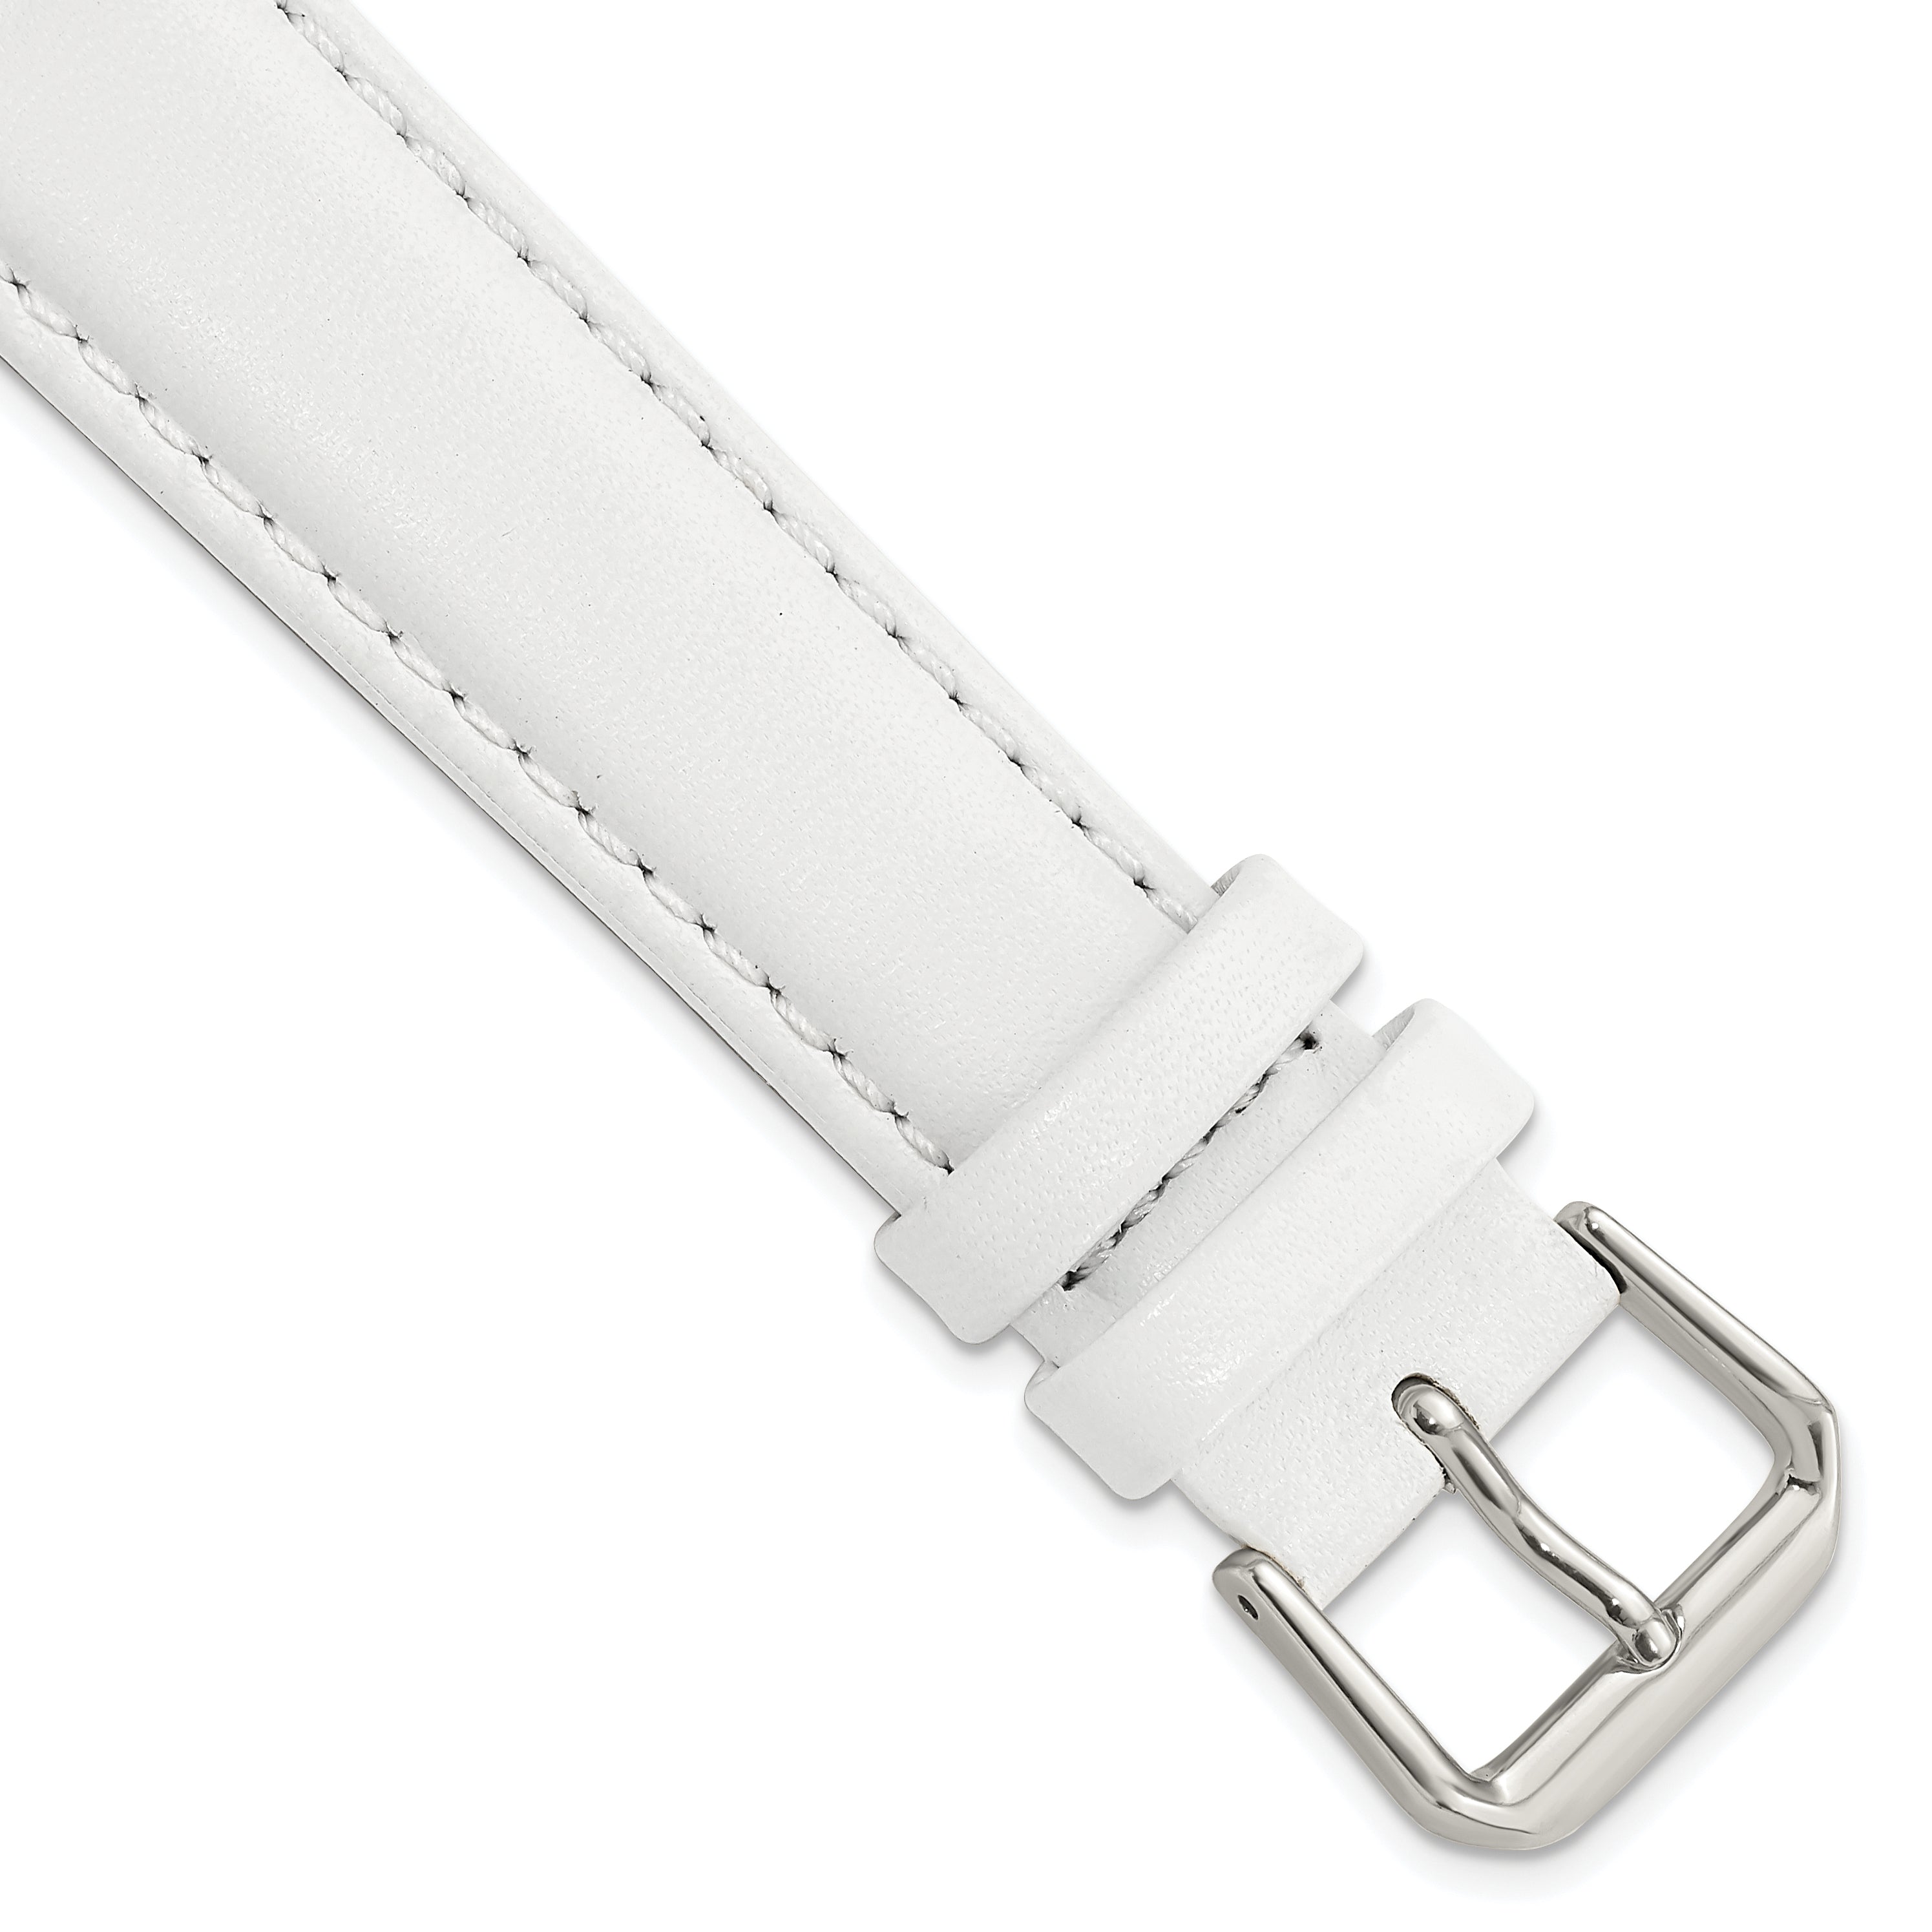 DeBeer 18mm White Smooth Leather with Silver-tone Buckle 7.5 inch Watch Band